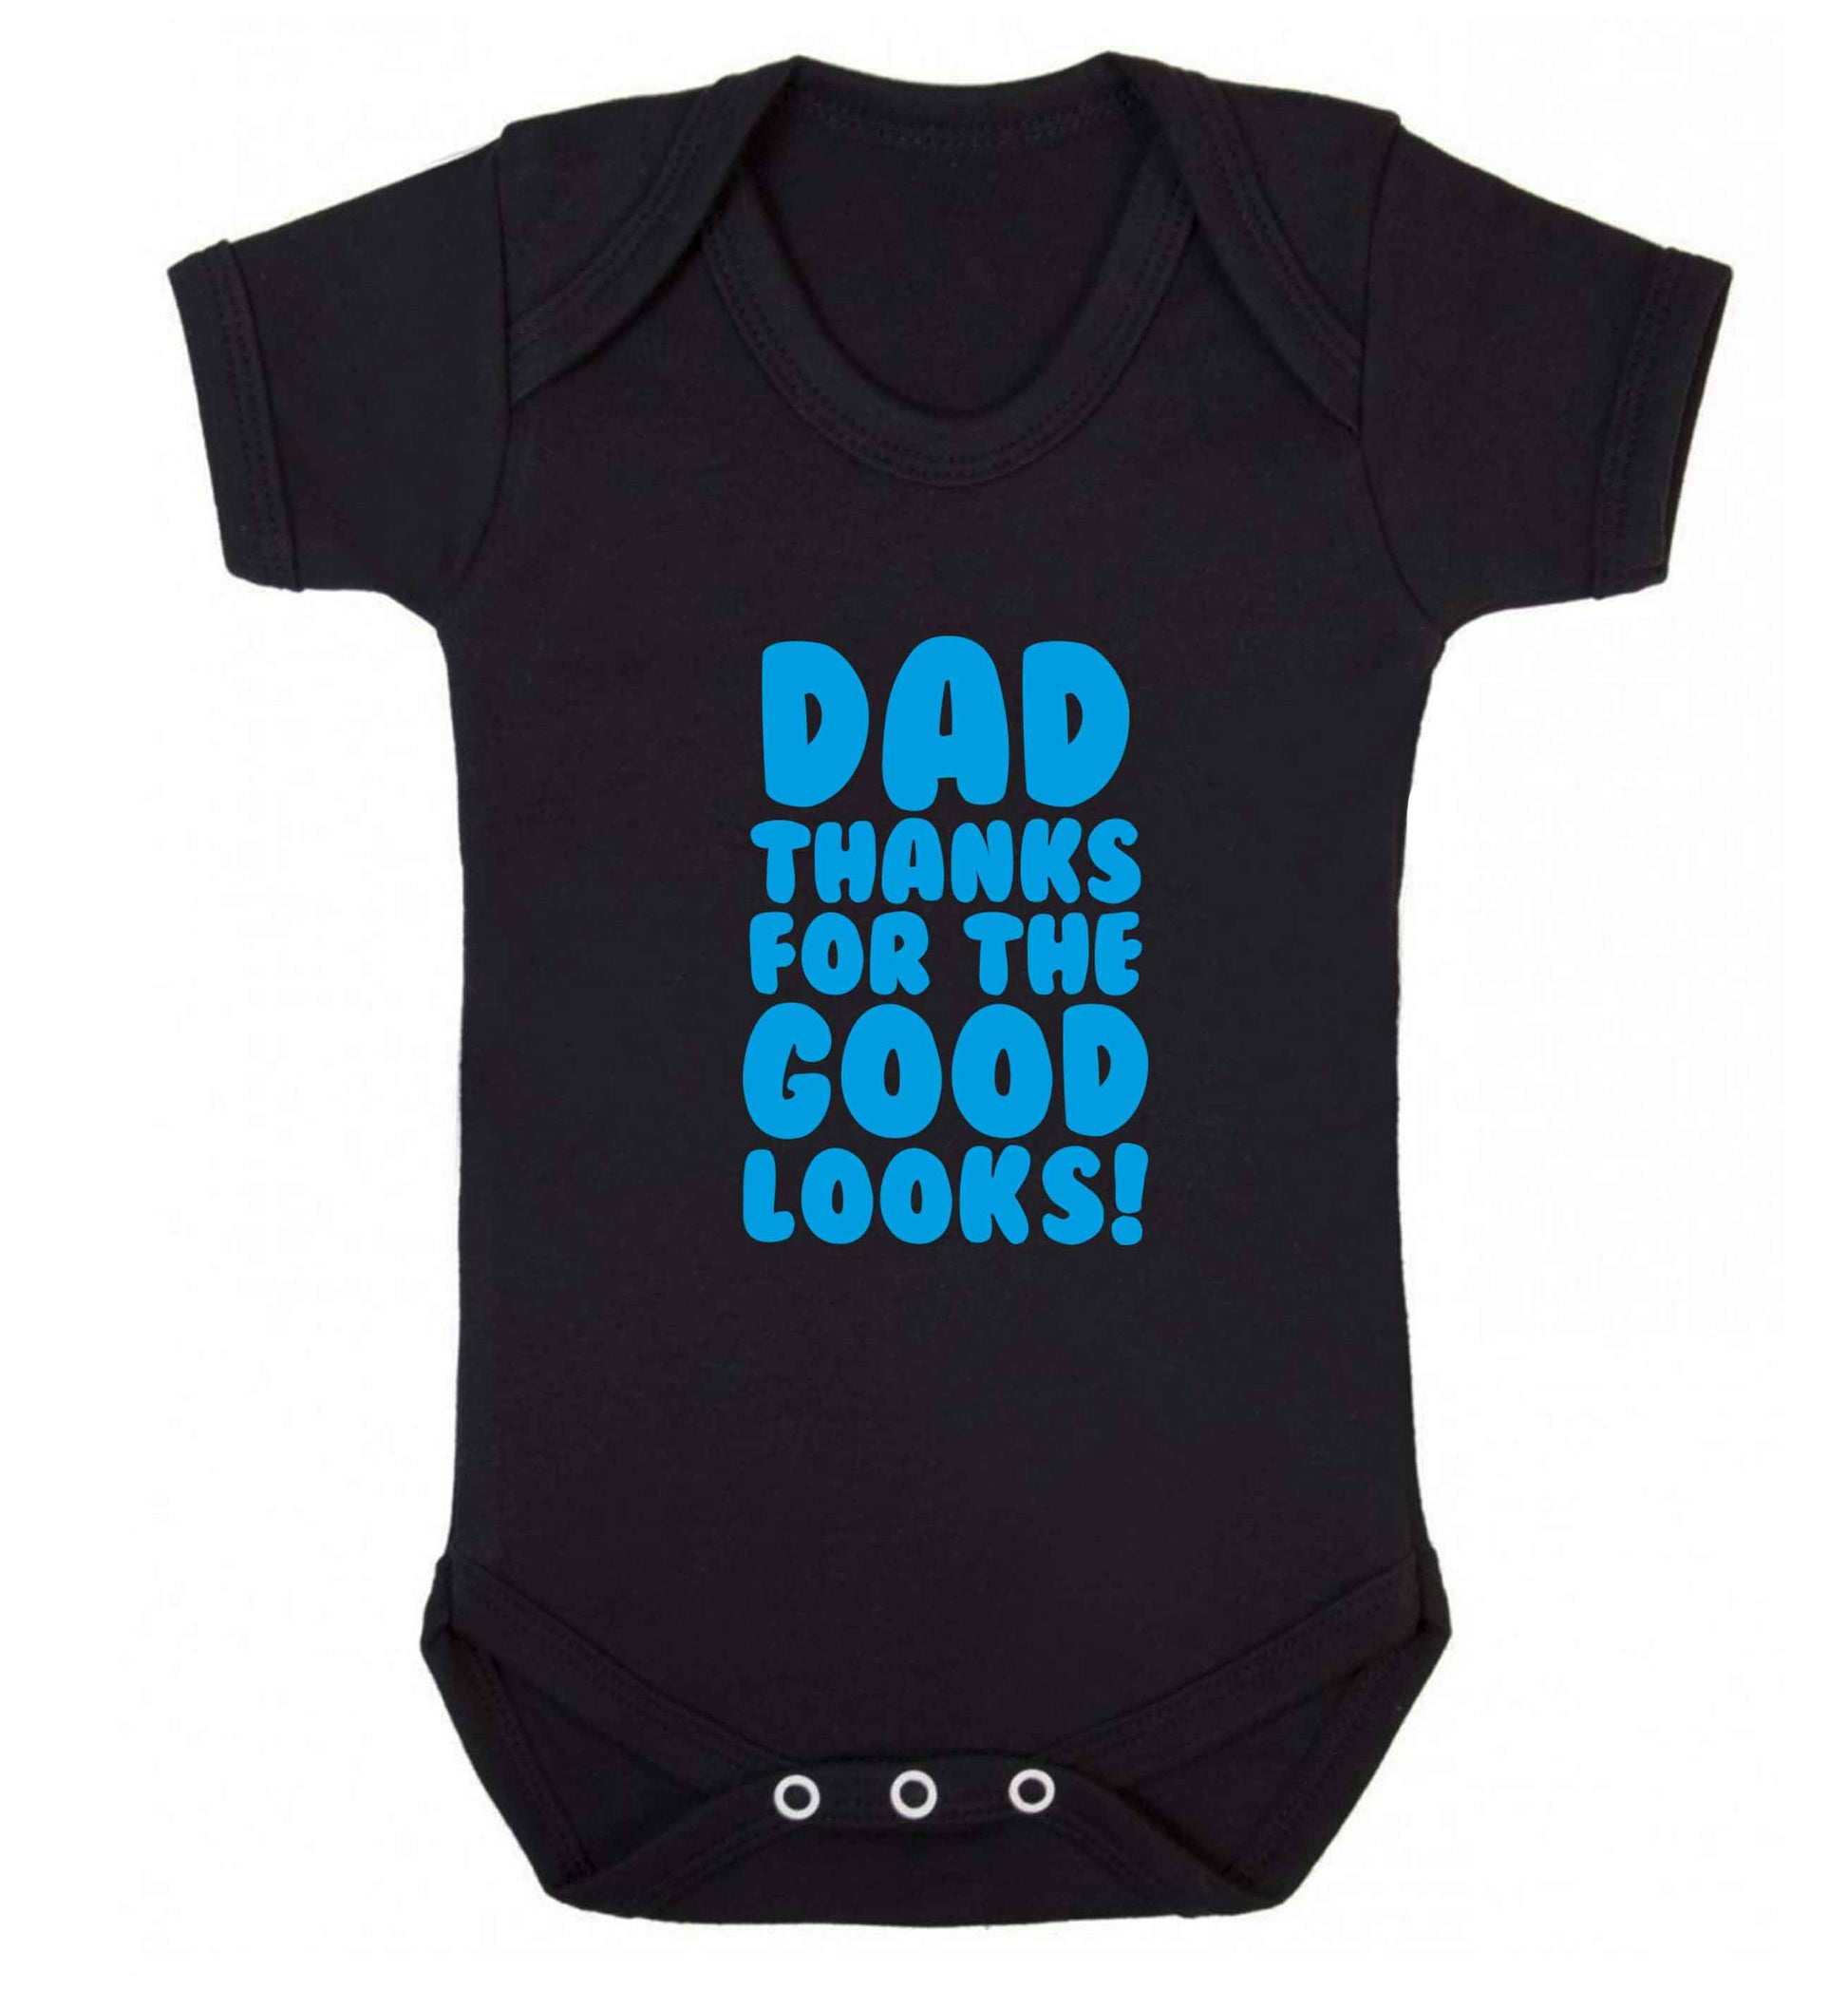 Dad thanks for the good looks baby vest black 18-24 months